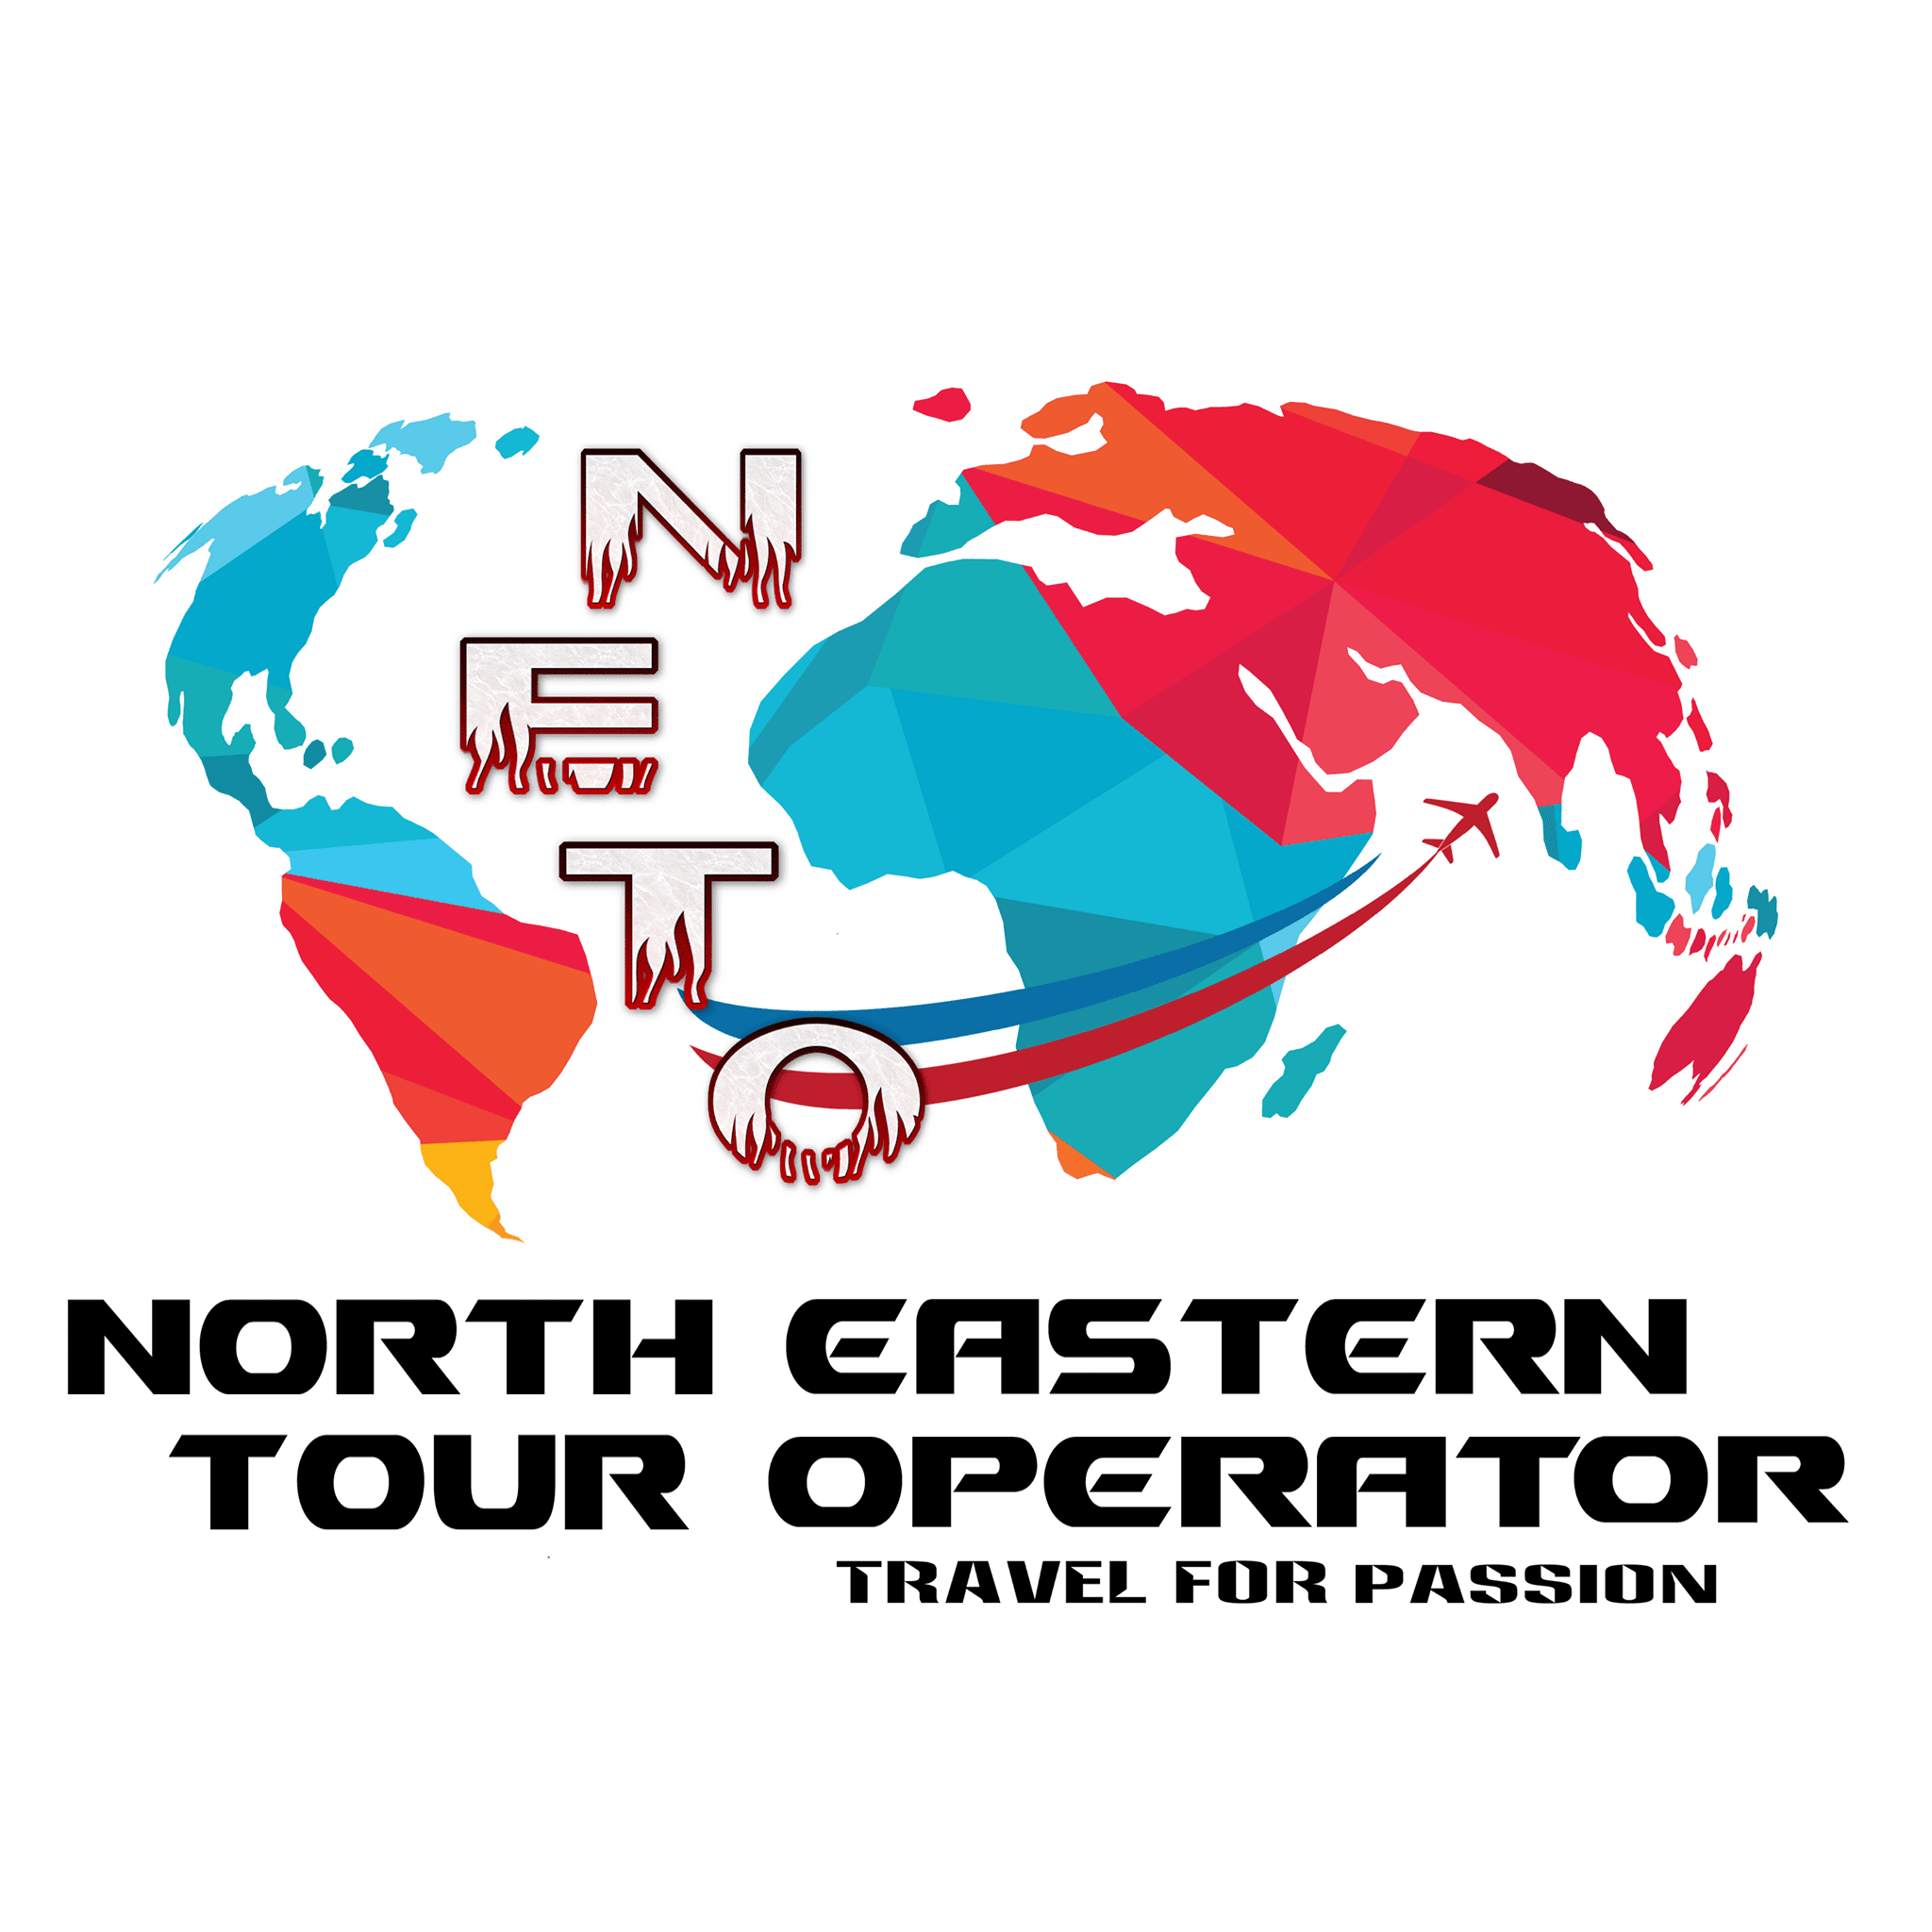 North Eastern Tour Operator